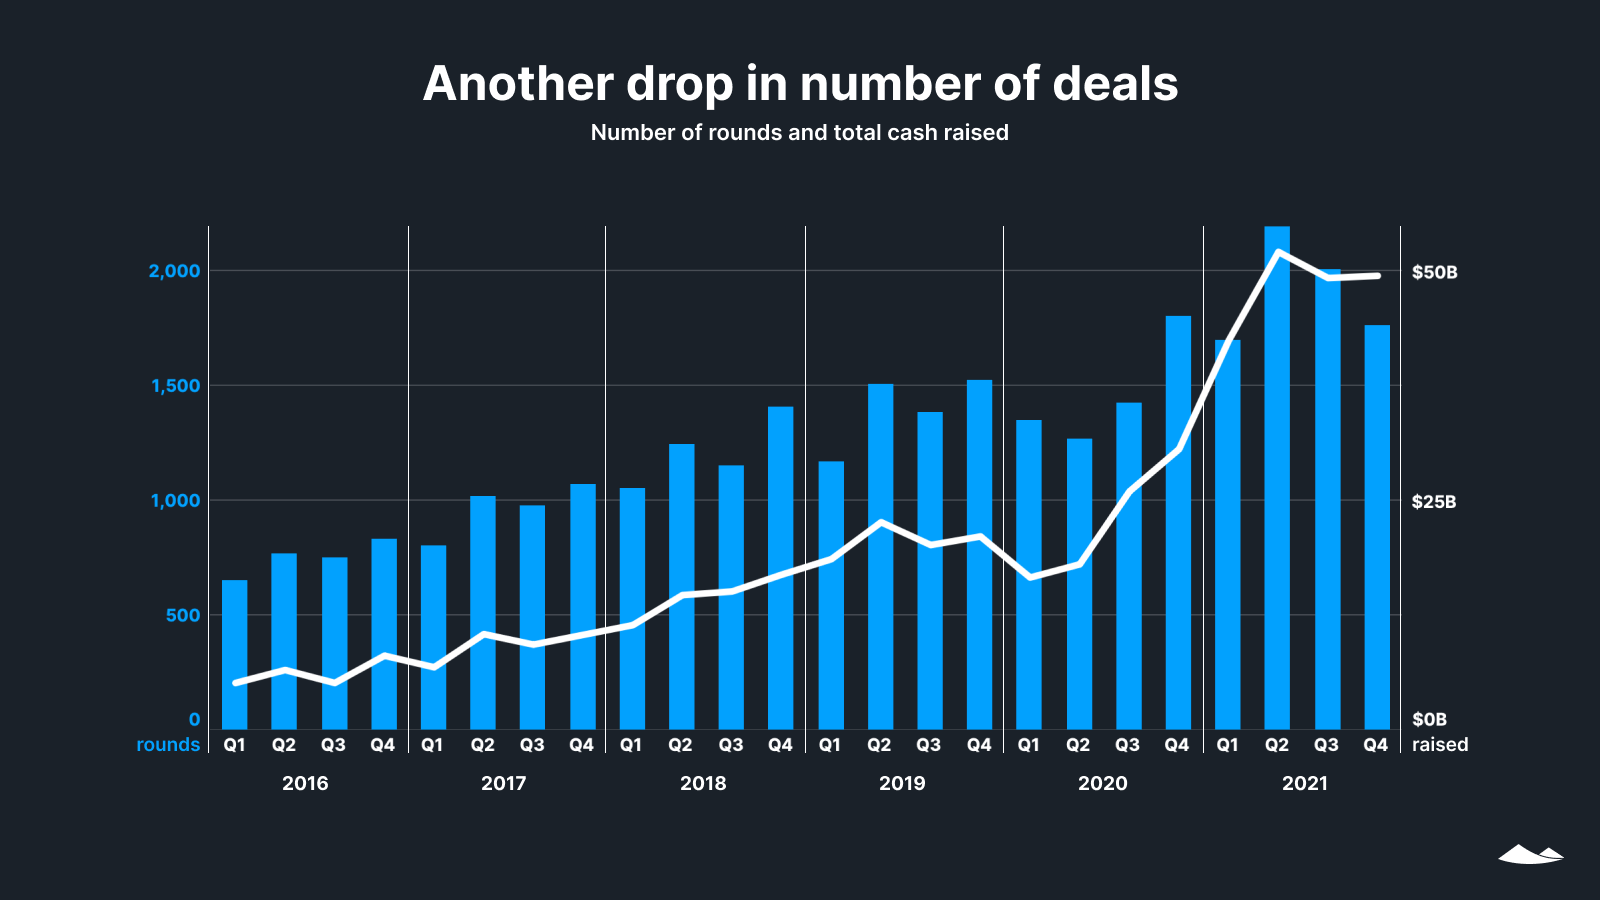 Another drop number of deals